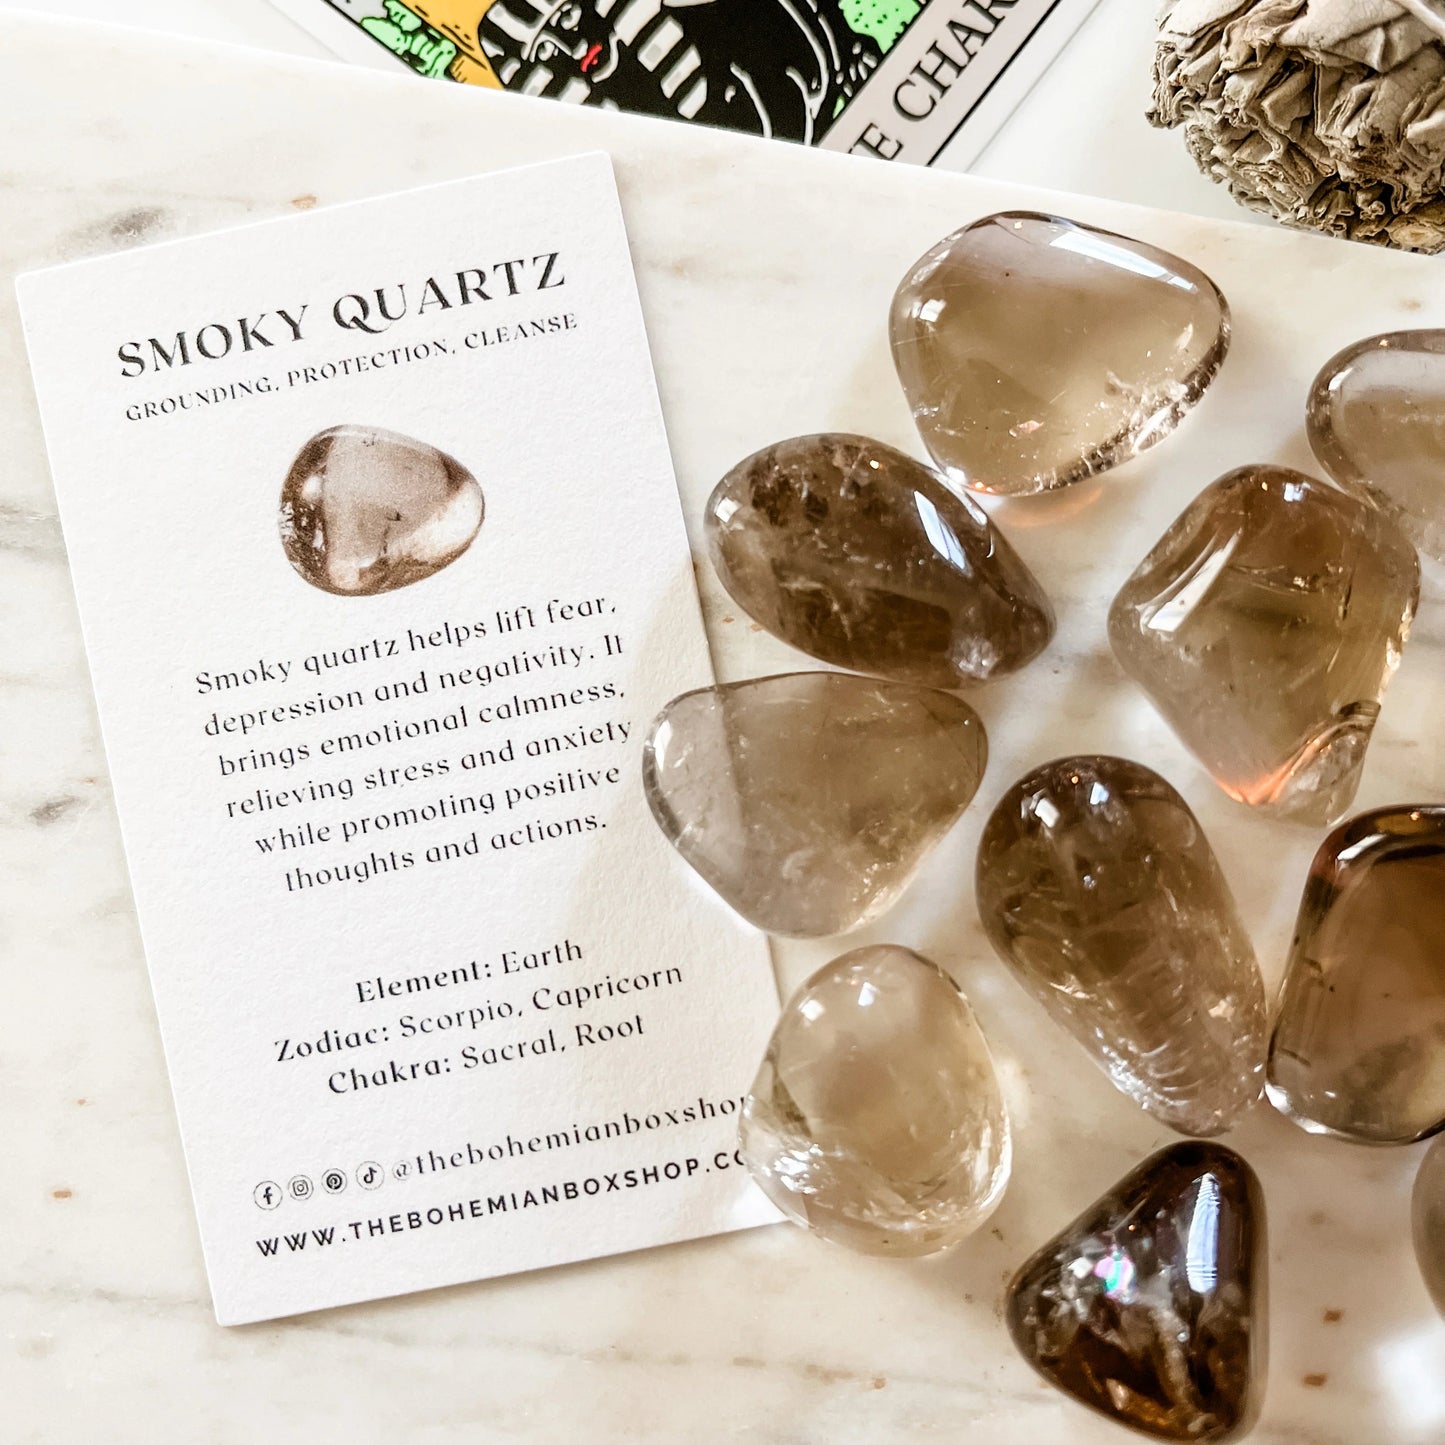 Smoky Quartz Tumbled Stone with complementary keepsake information card